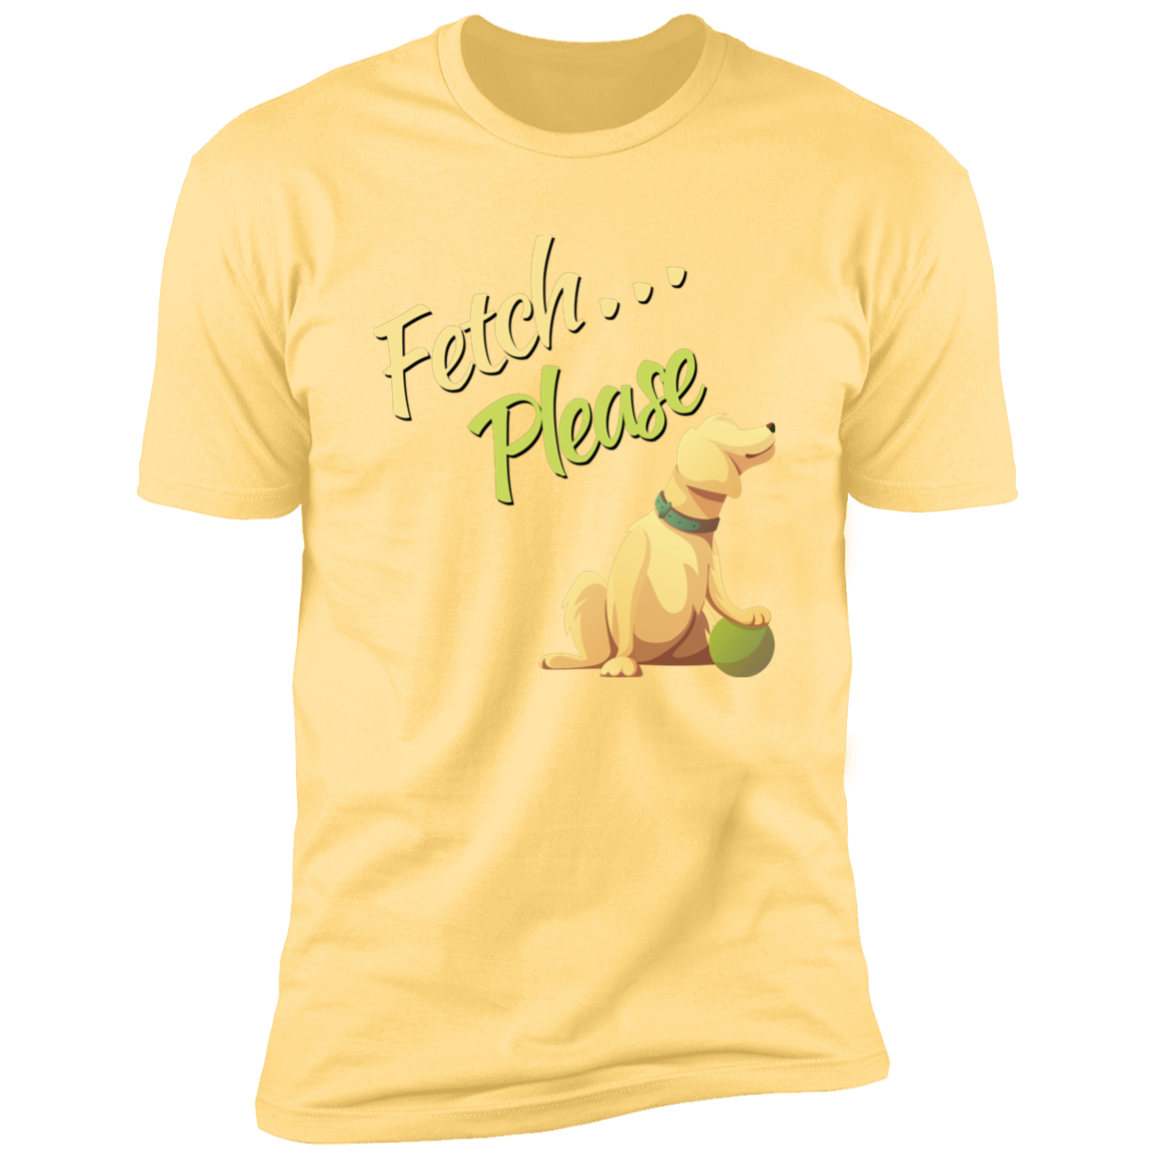 Fetch Please funny dog t-shirt, funny dog shirt for humans, in banana cream